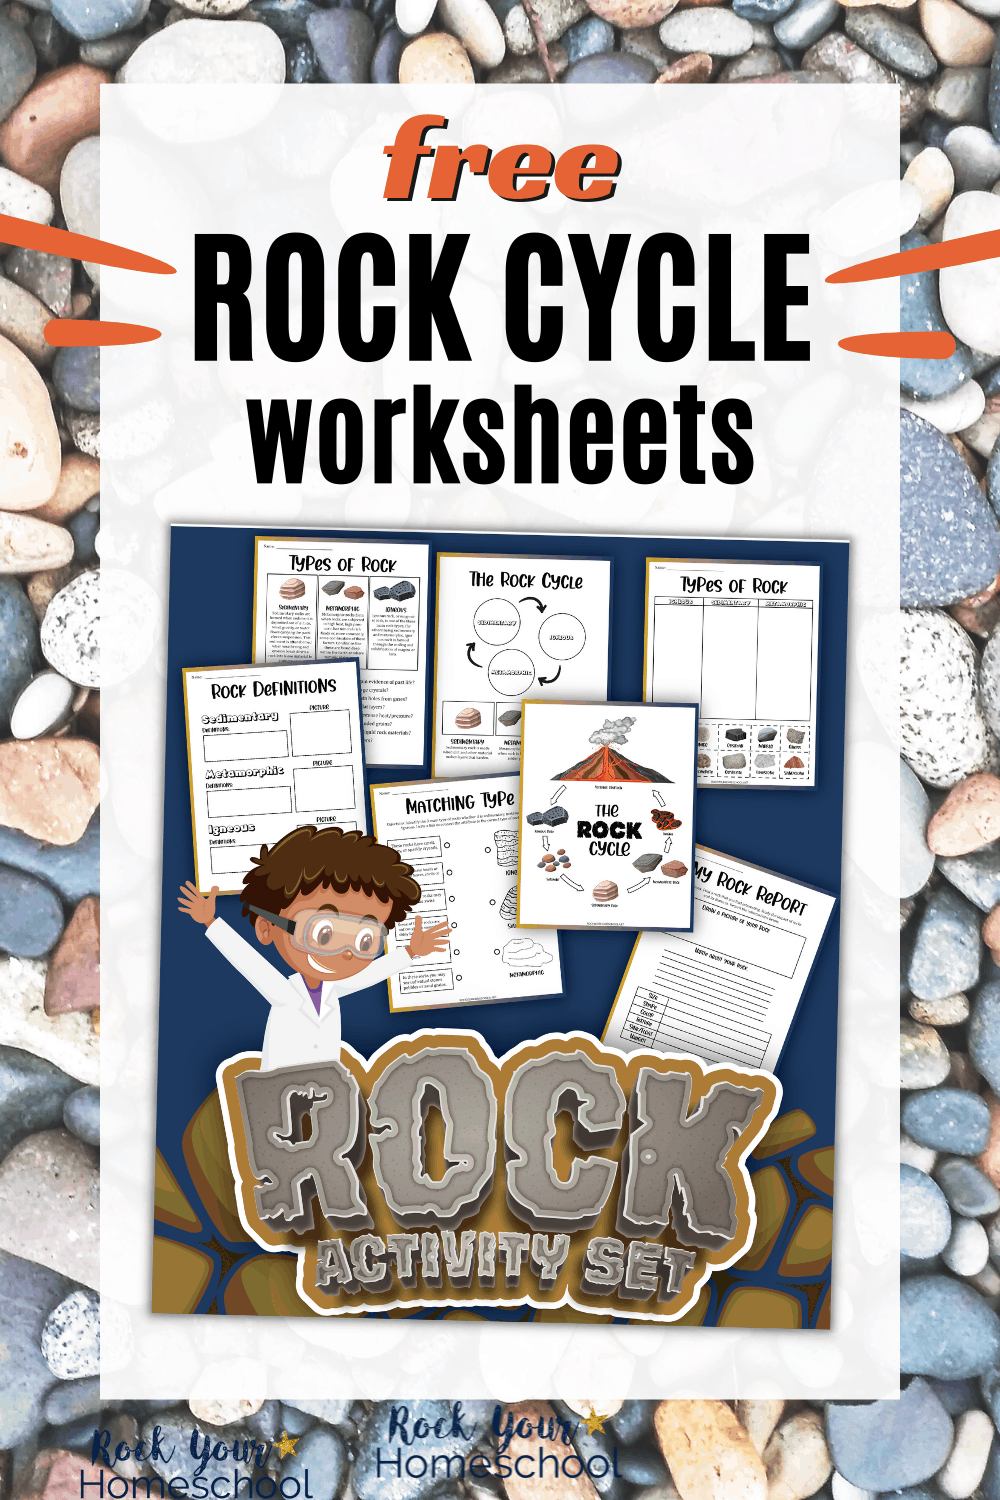 Free Rock Cycle Worksheets for Simple Science Fun for Your Kids